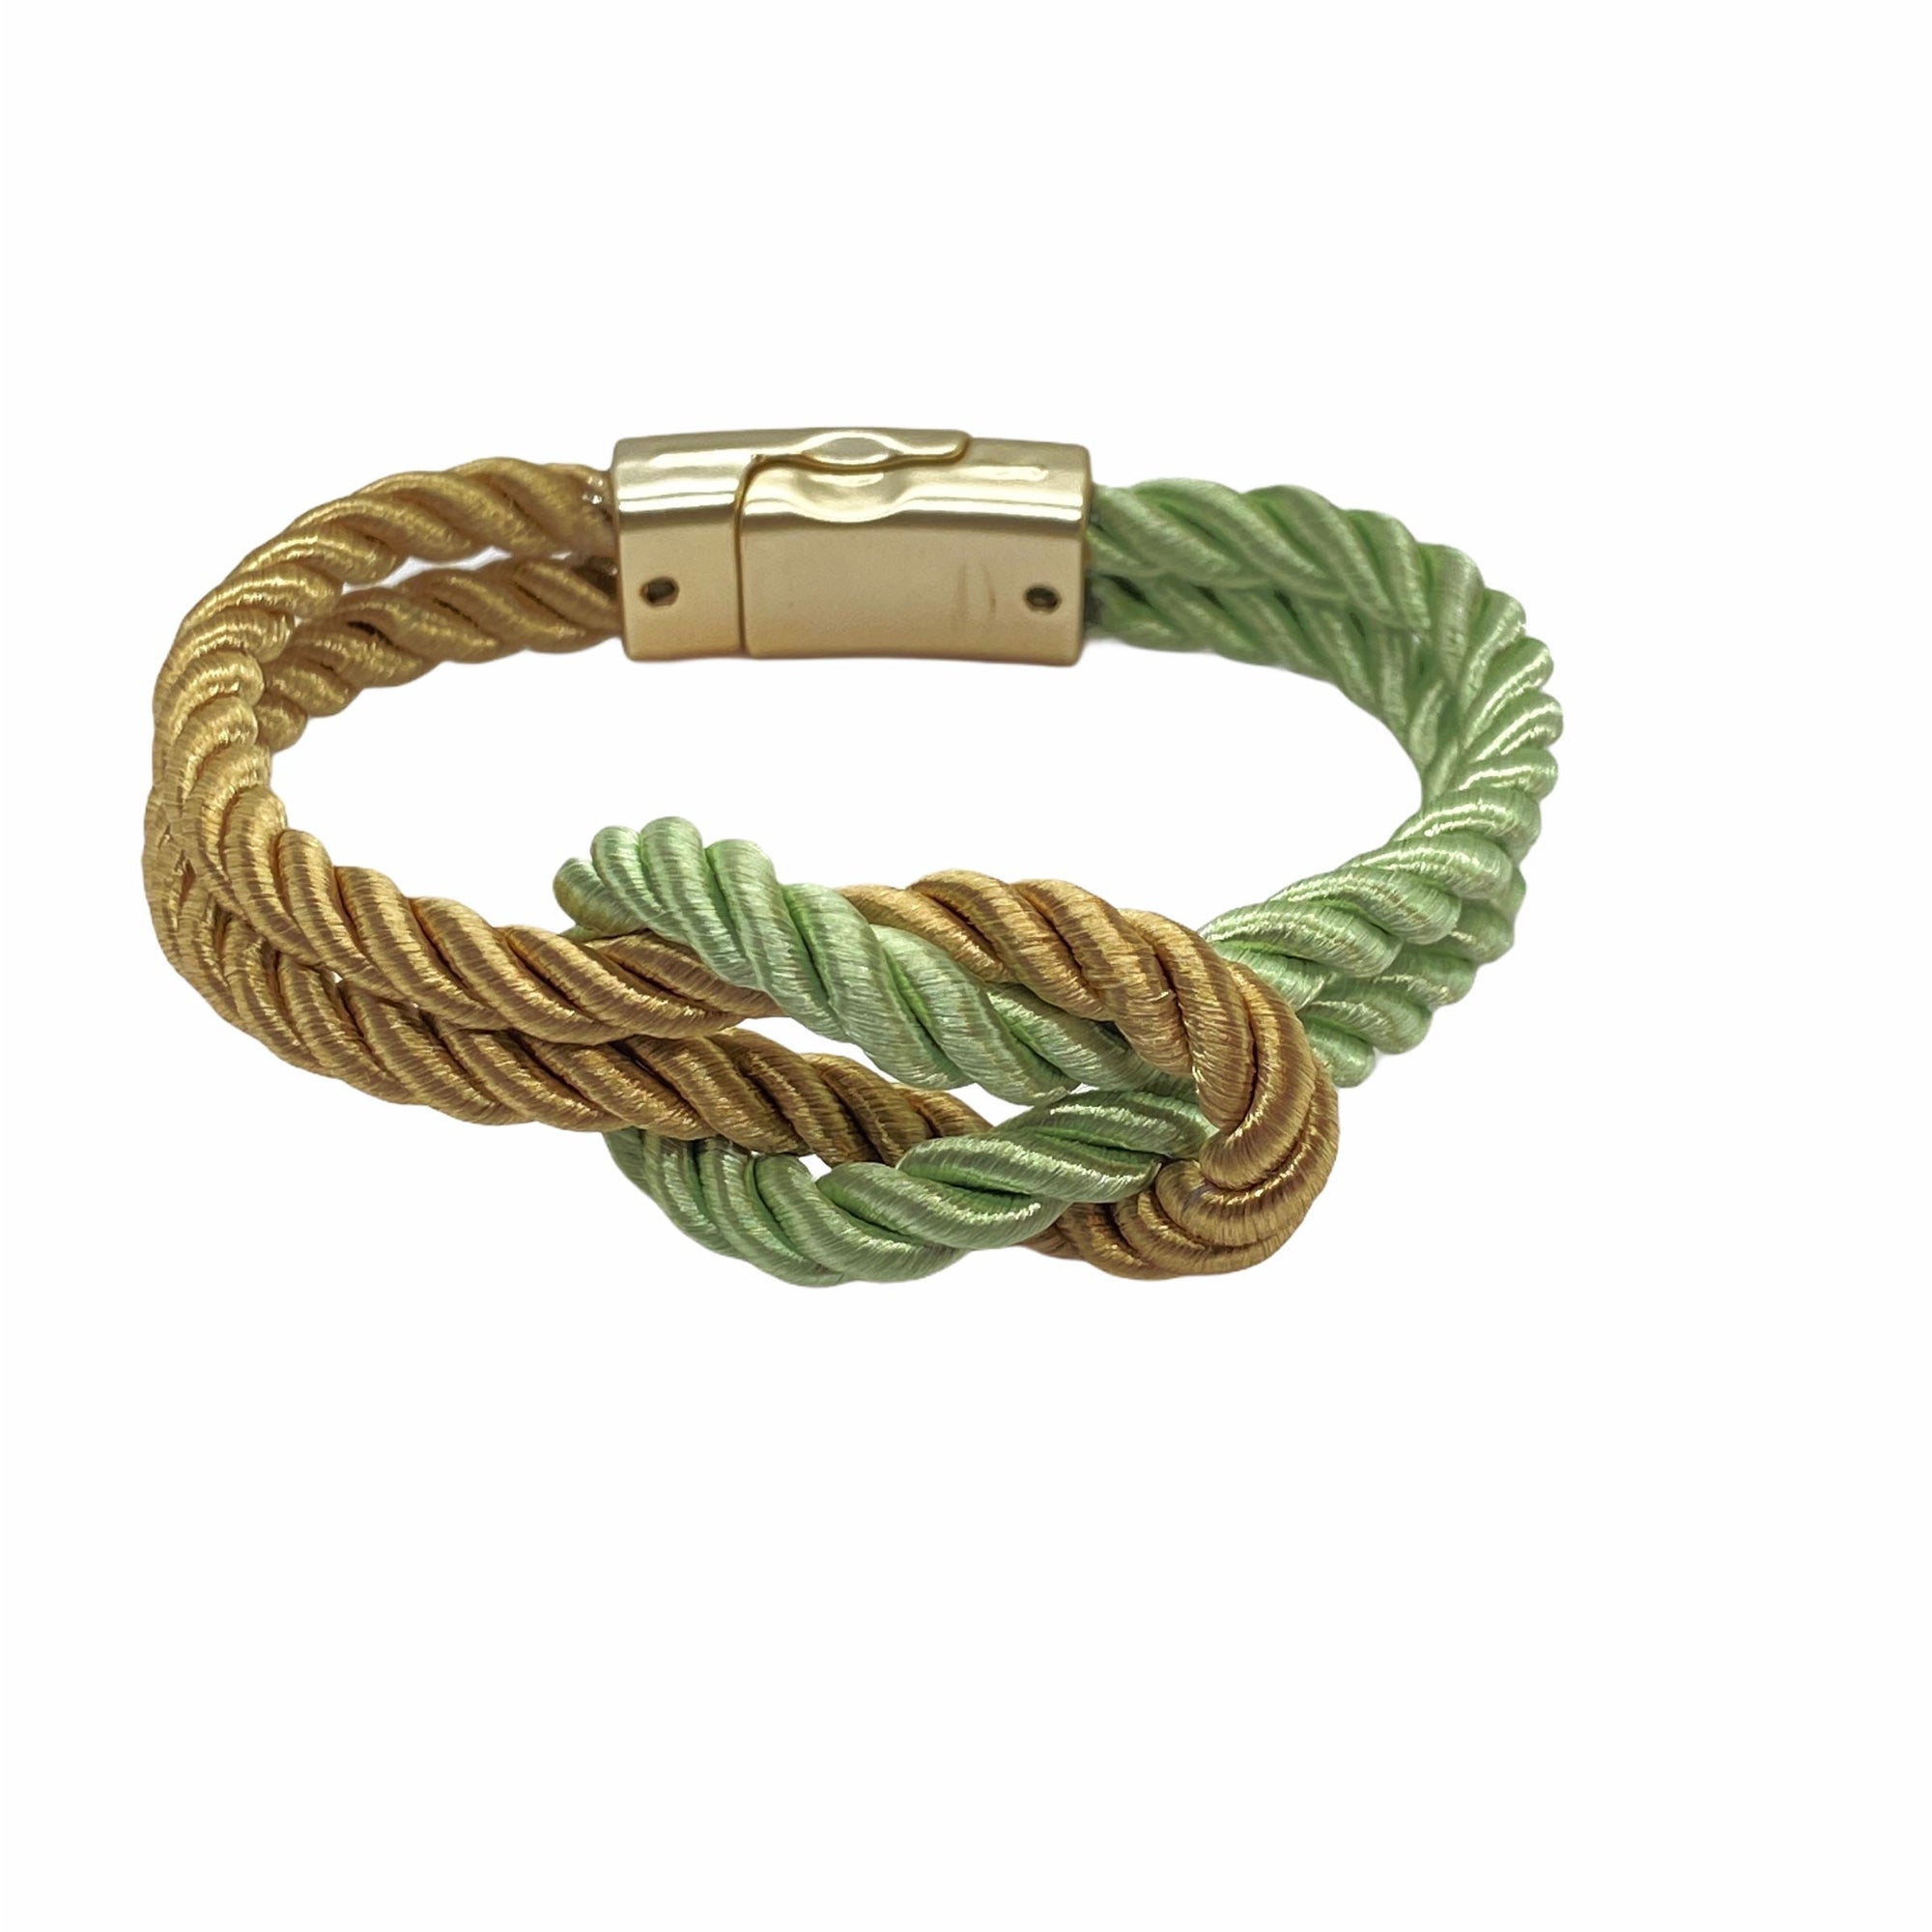 The Original Love Knot Satin Rope Bracelet- Old Gold and Mint Green Bracelets Trendzio Old gold and Mint Green 